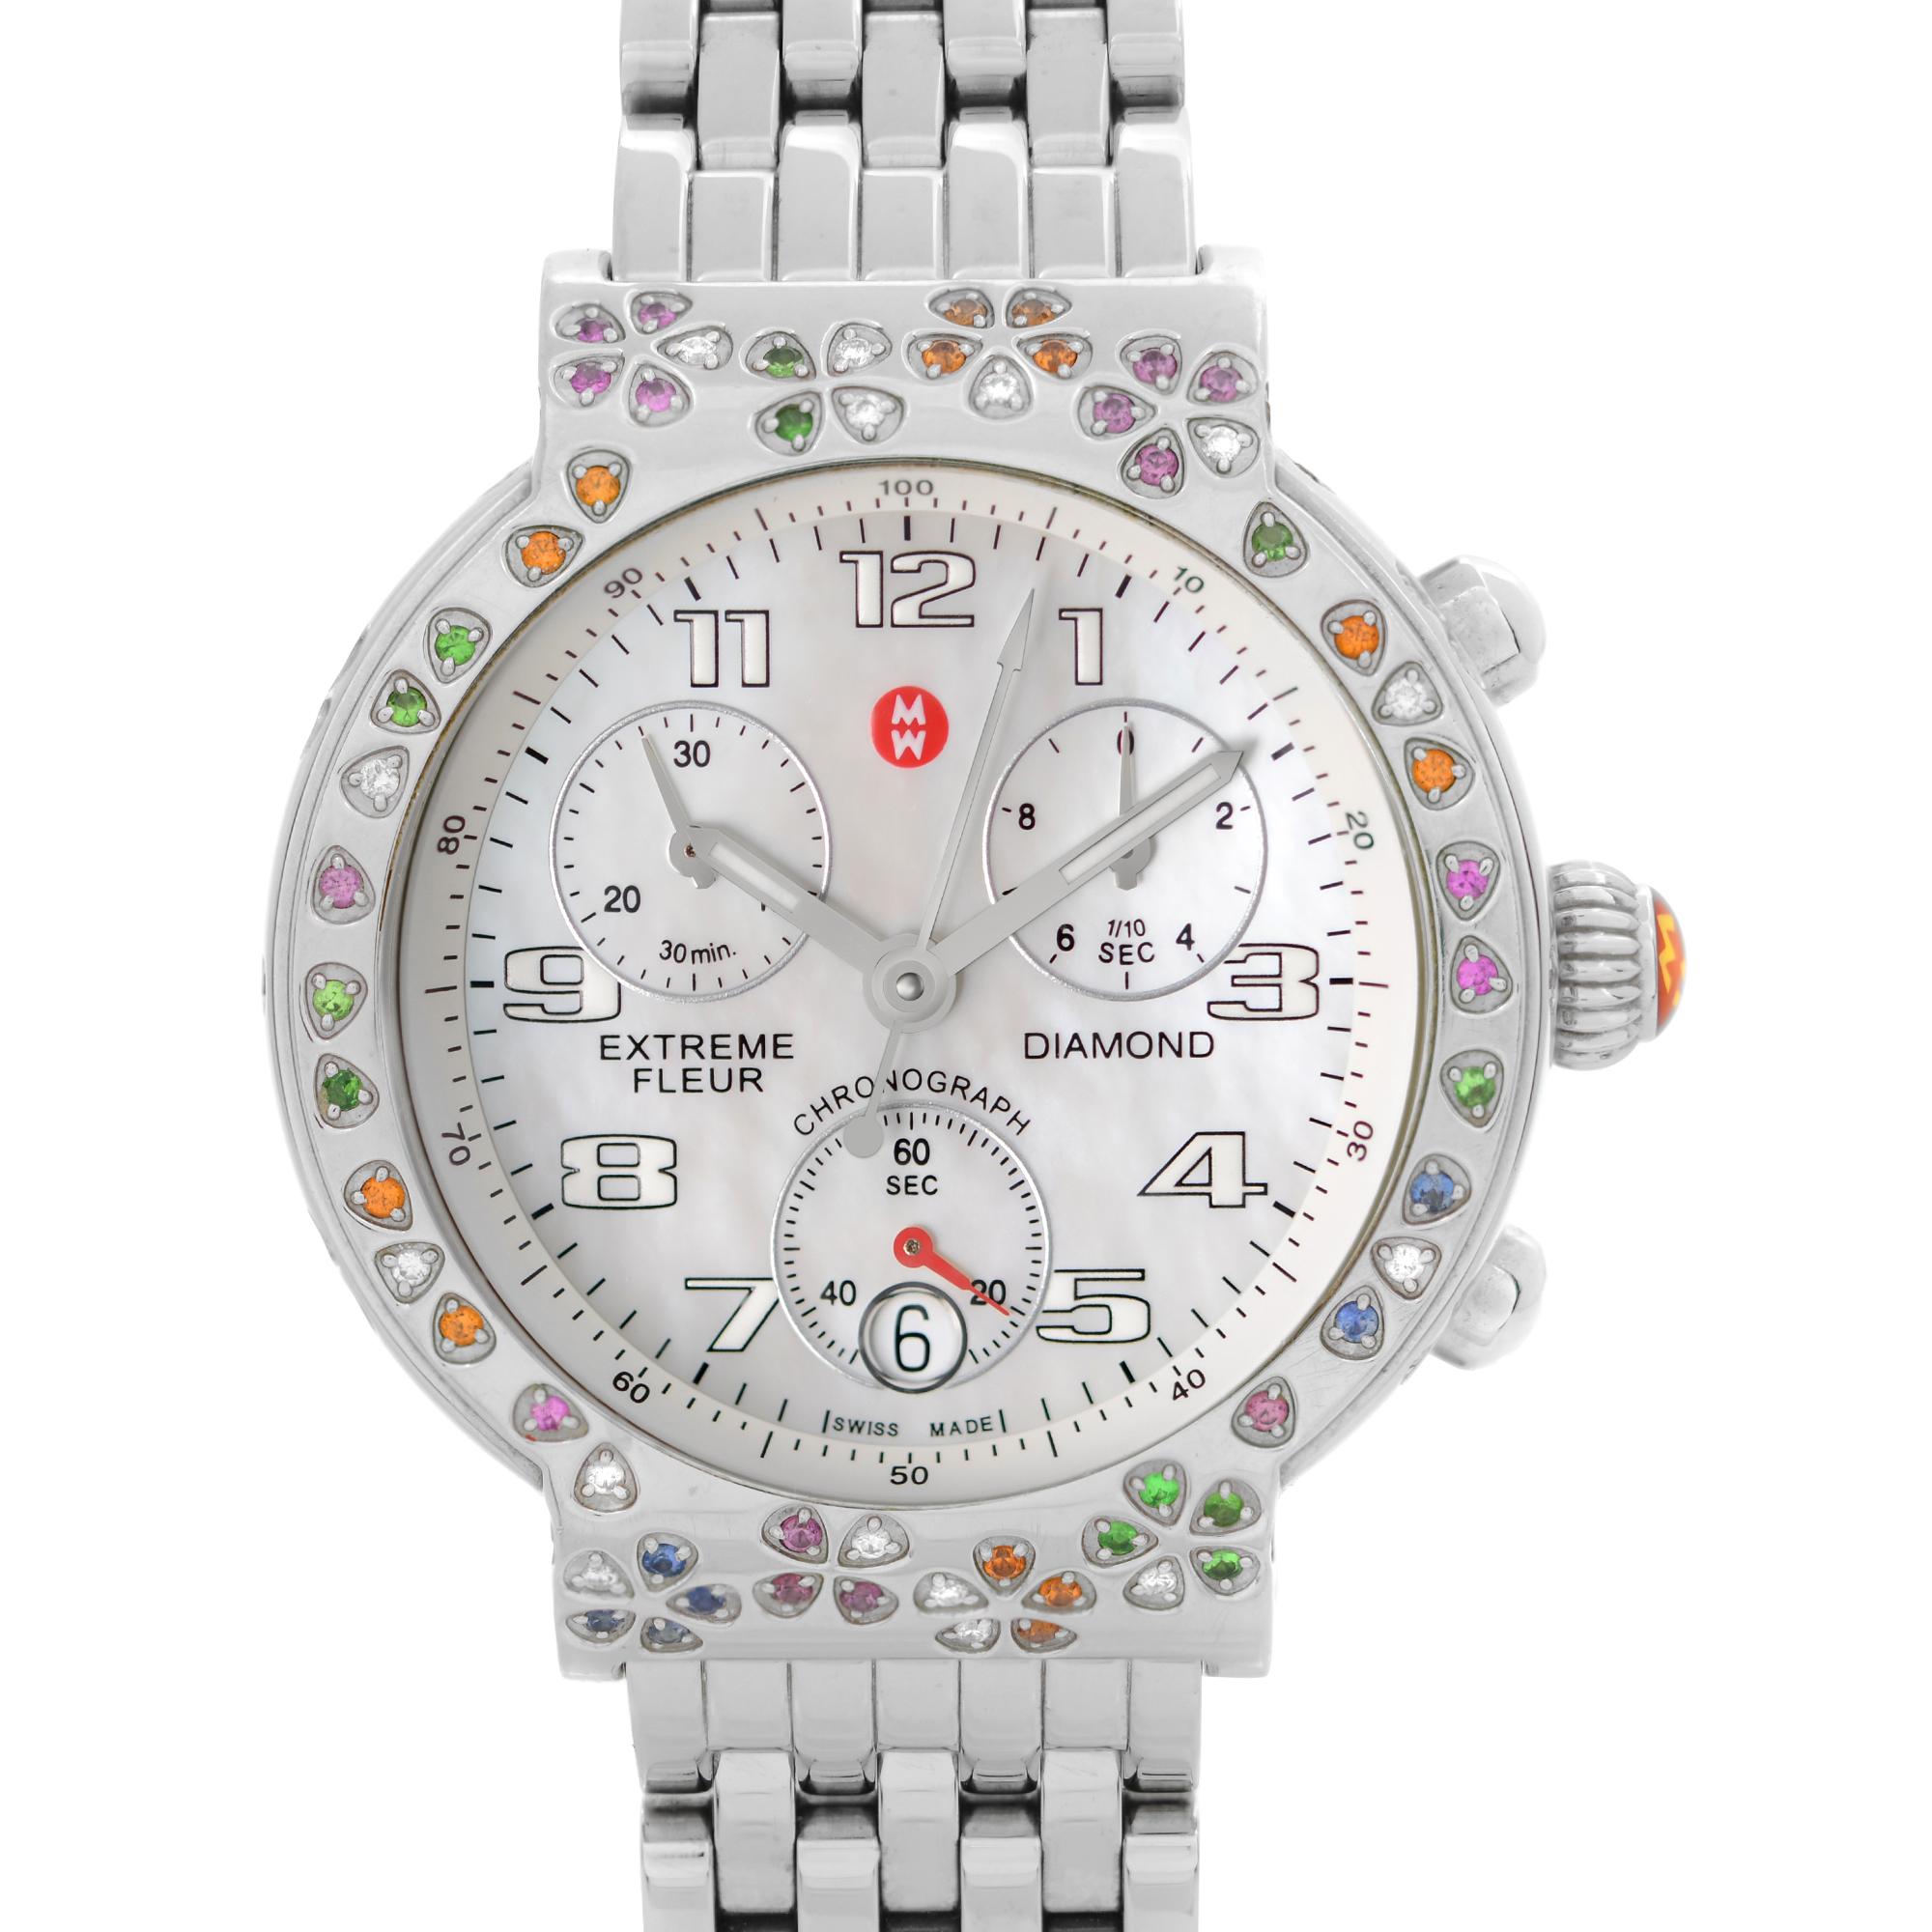 Pre Owned Michele Extreme Fleur Diamond Steel MOP Dial Ladies Quartz Watch MW04A13.  Multi-Color stones Set in flower styles. This Beautiful Timepiece is Powered by Quartz (Battery) Movement And Features: Round Stainless Steel Case Set with Gems